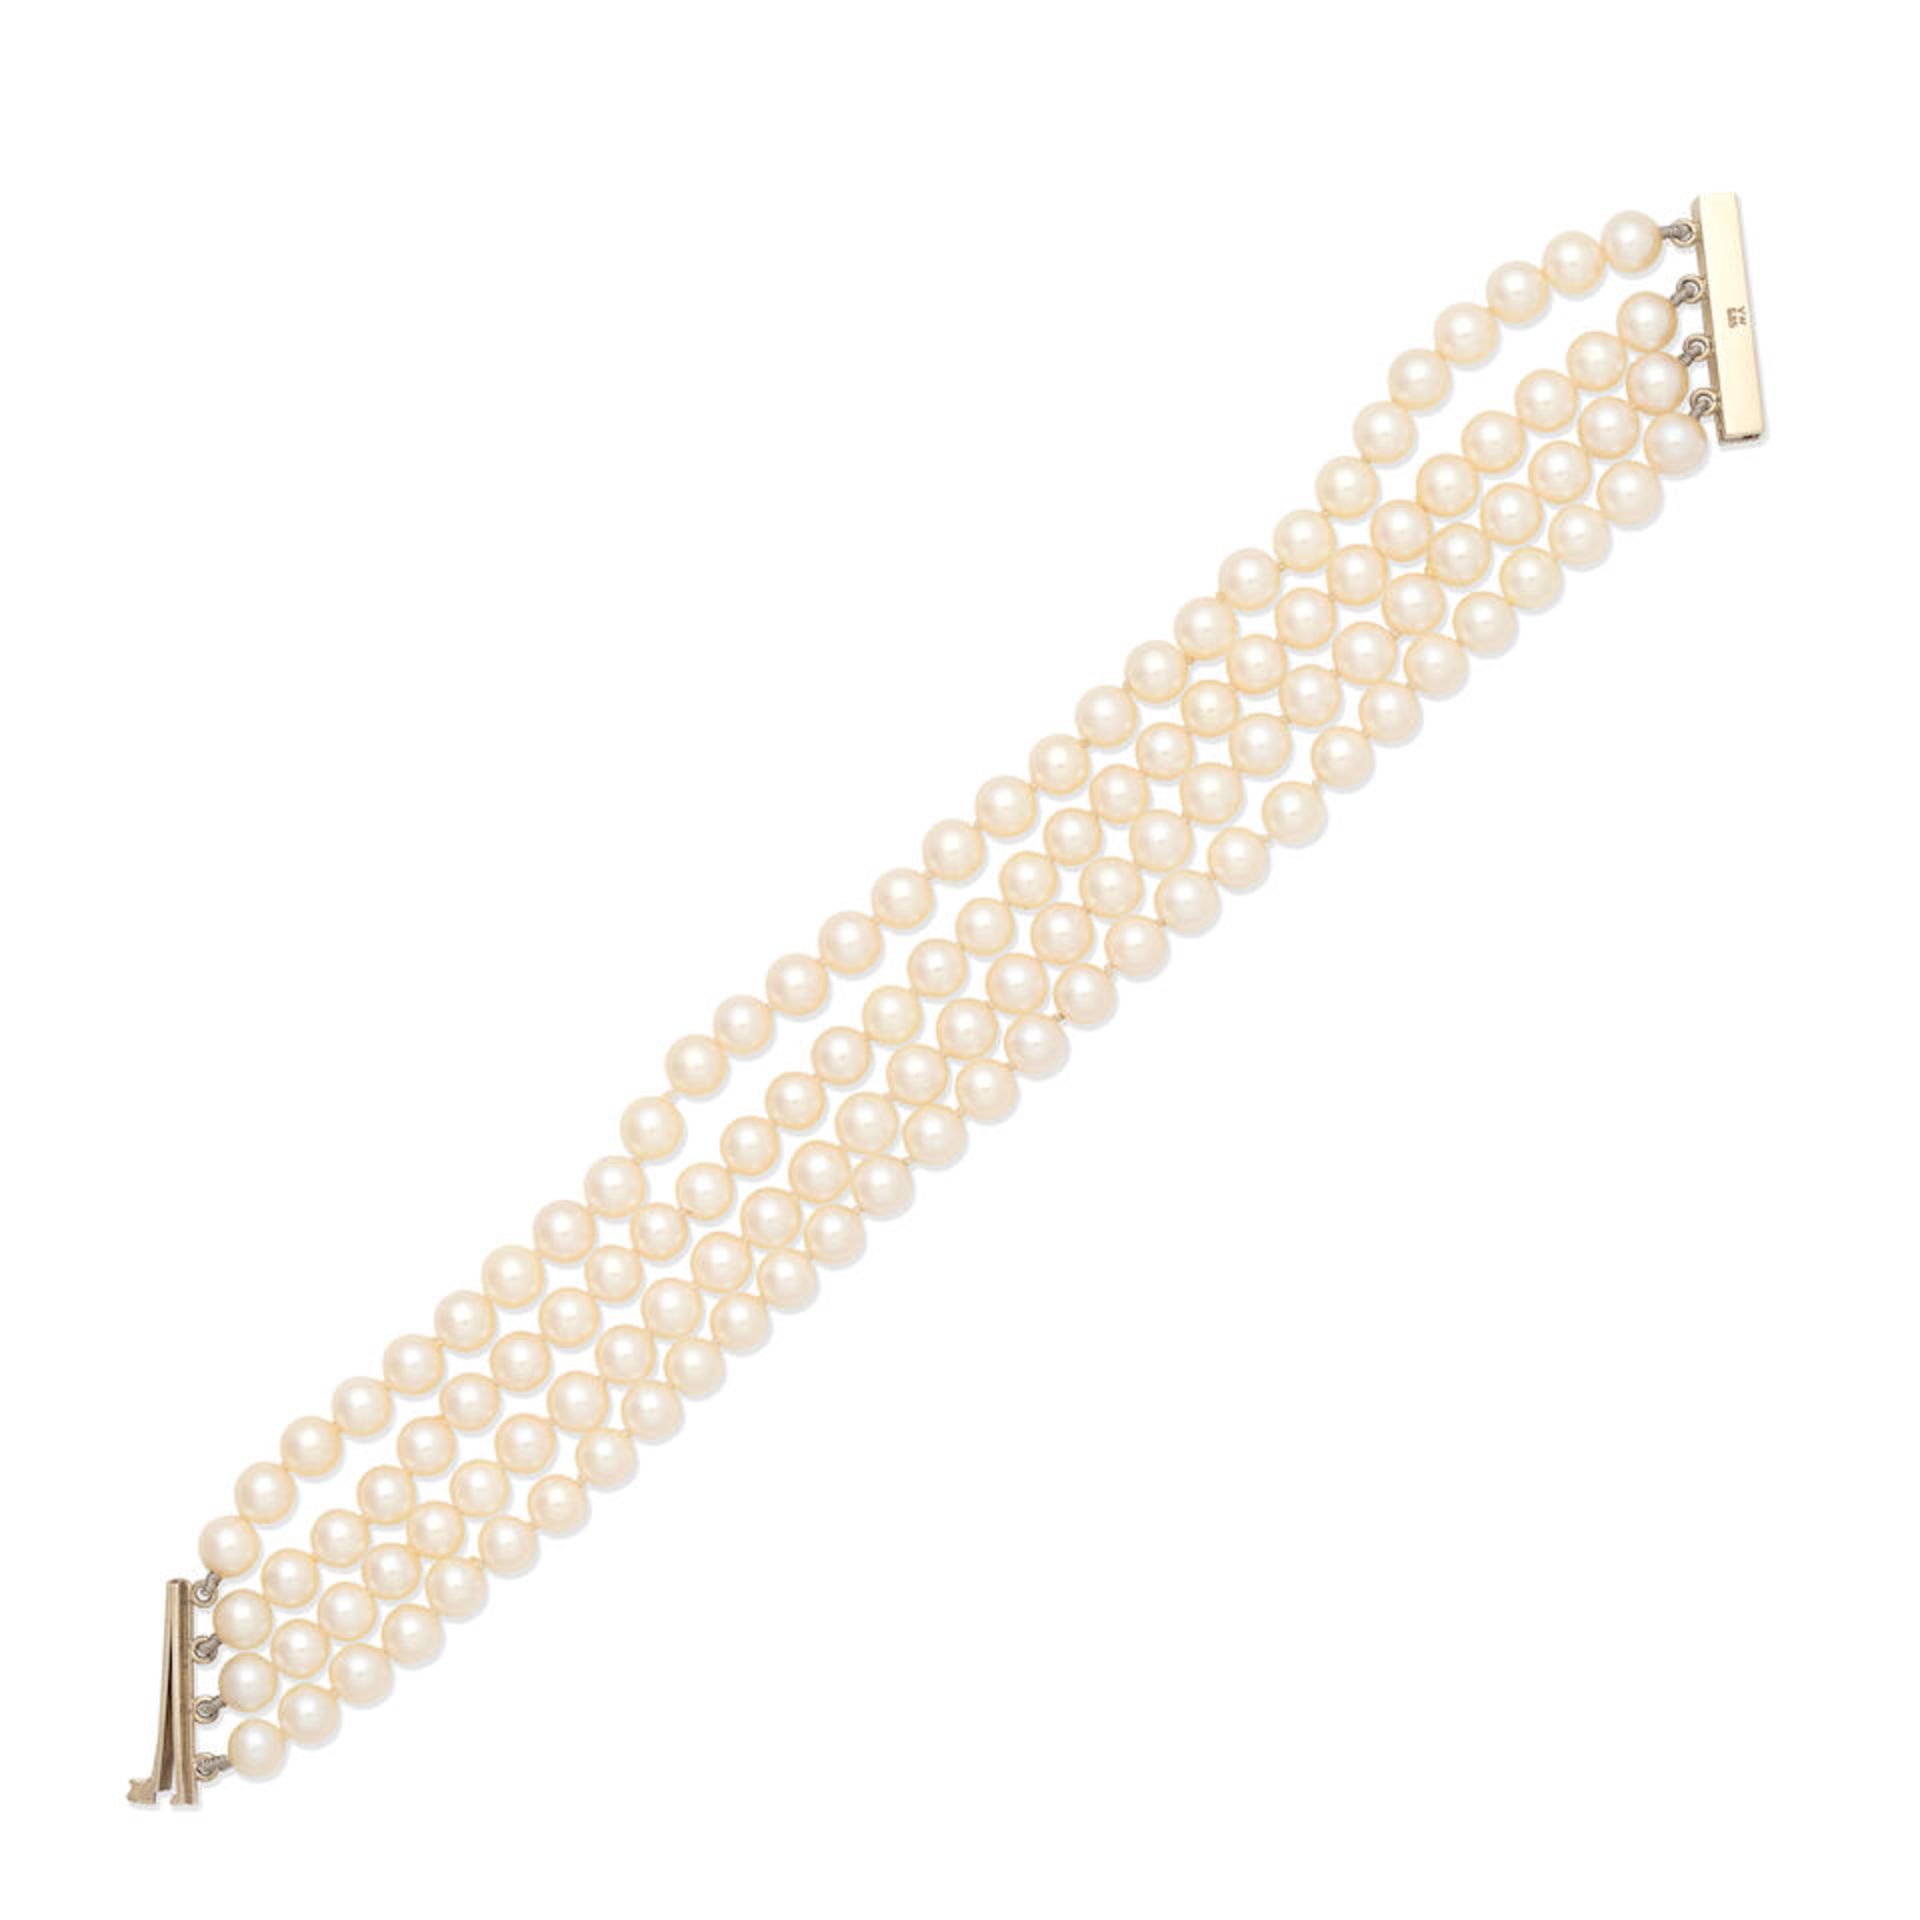 CULTURED PEARL BRACELET WITH DIAMOND CLASP - Image 2 of 2